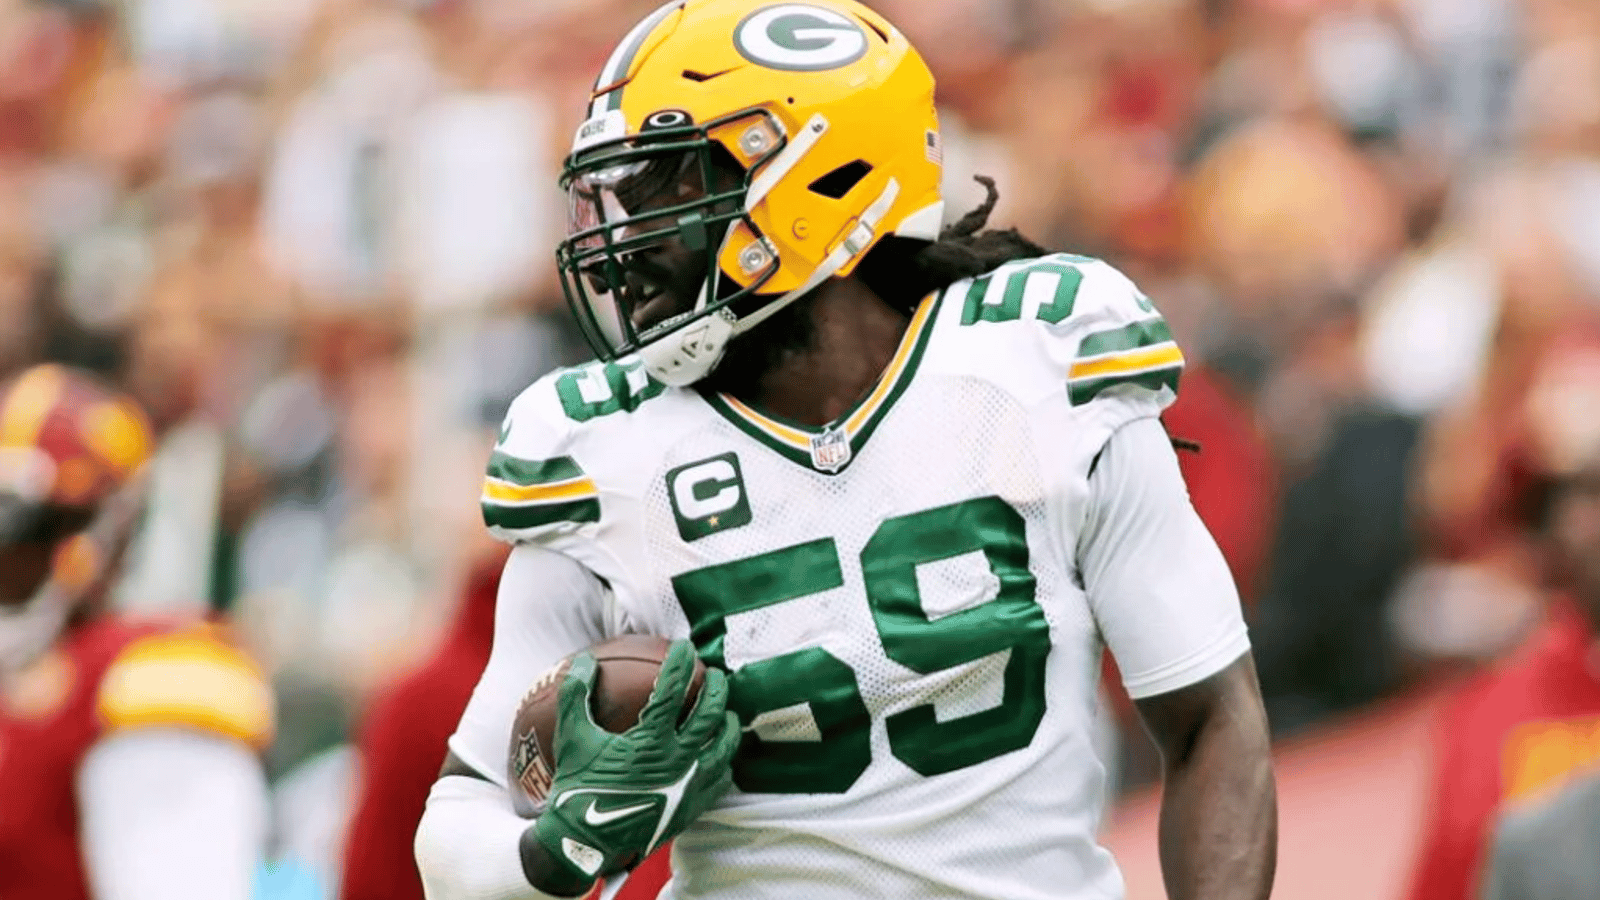 De’Vondre Campbell attacks Packers on his way out 